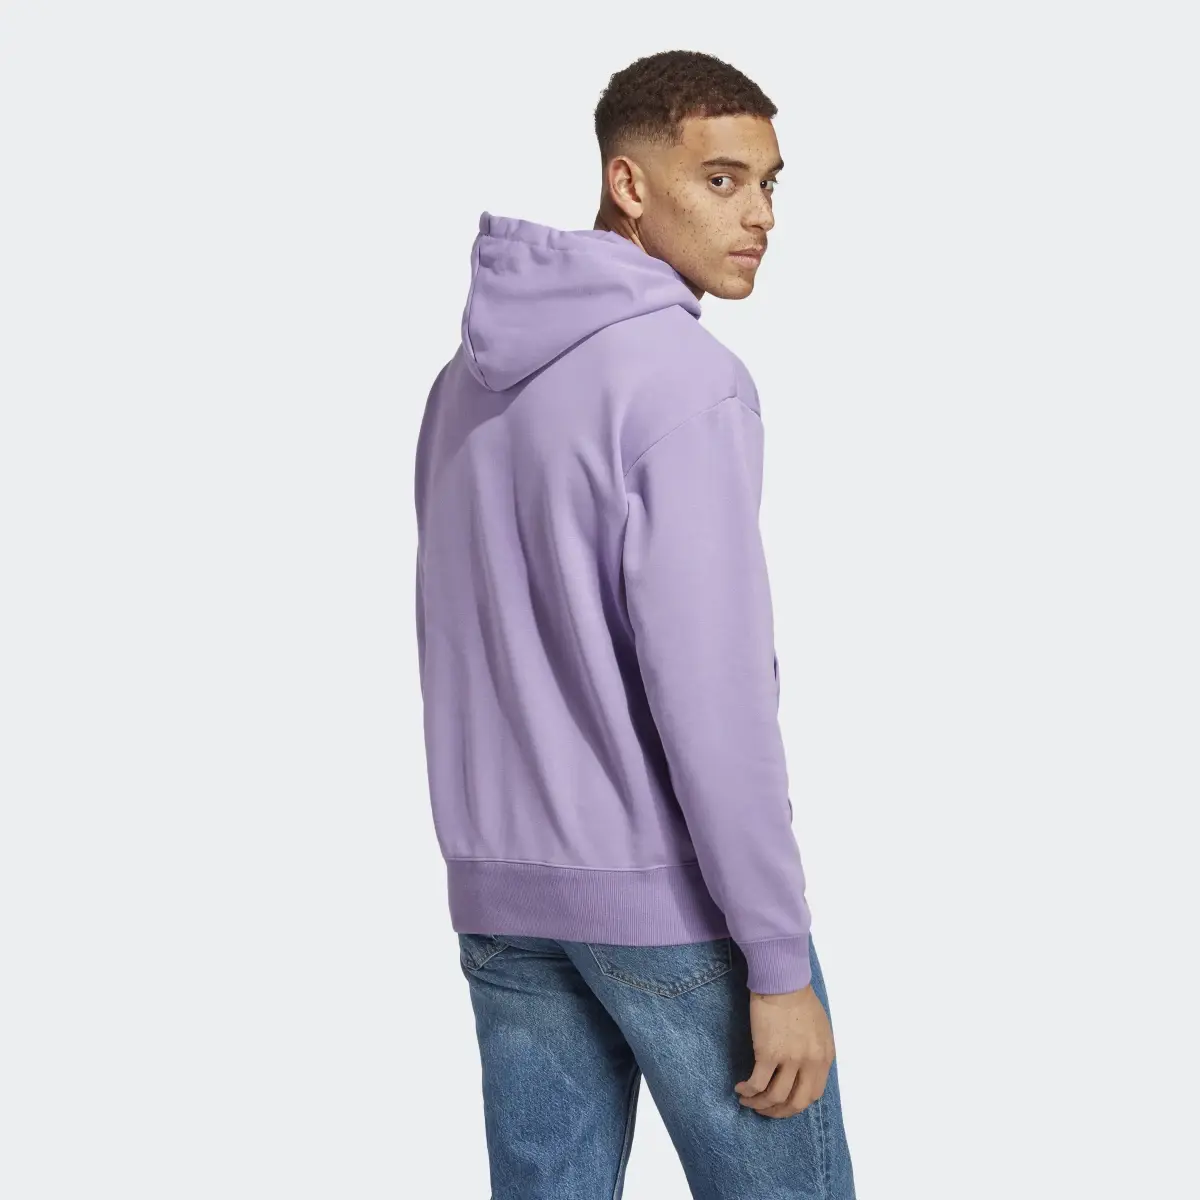 Adidas ALL SZN French Terry Hoodie. 3